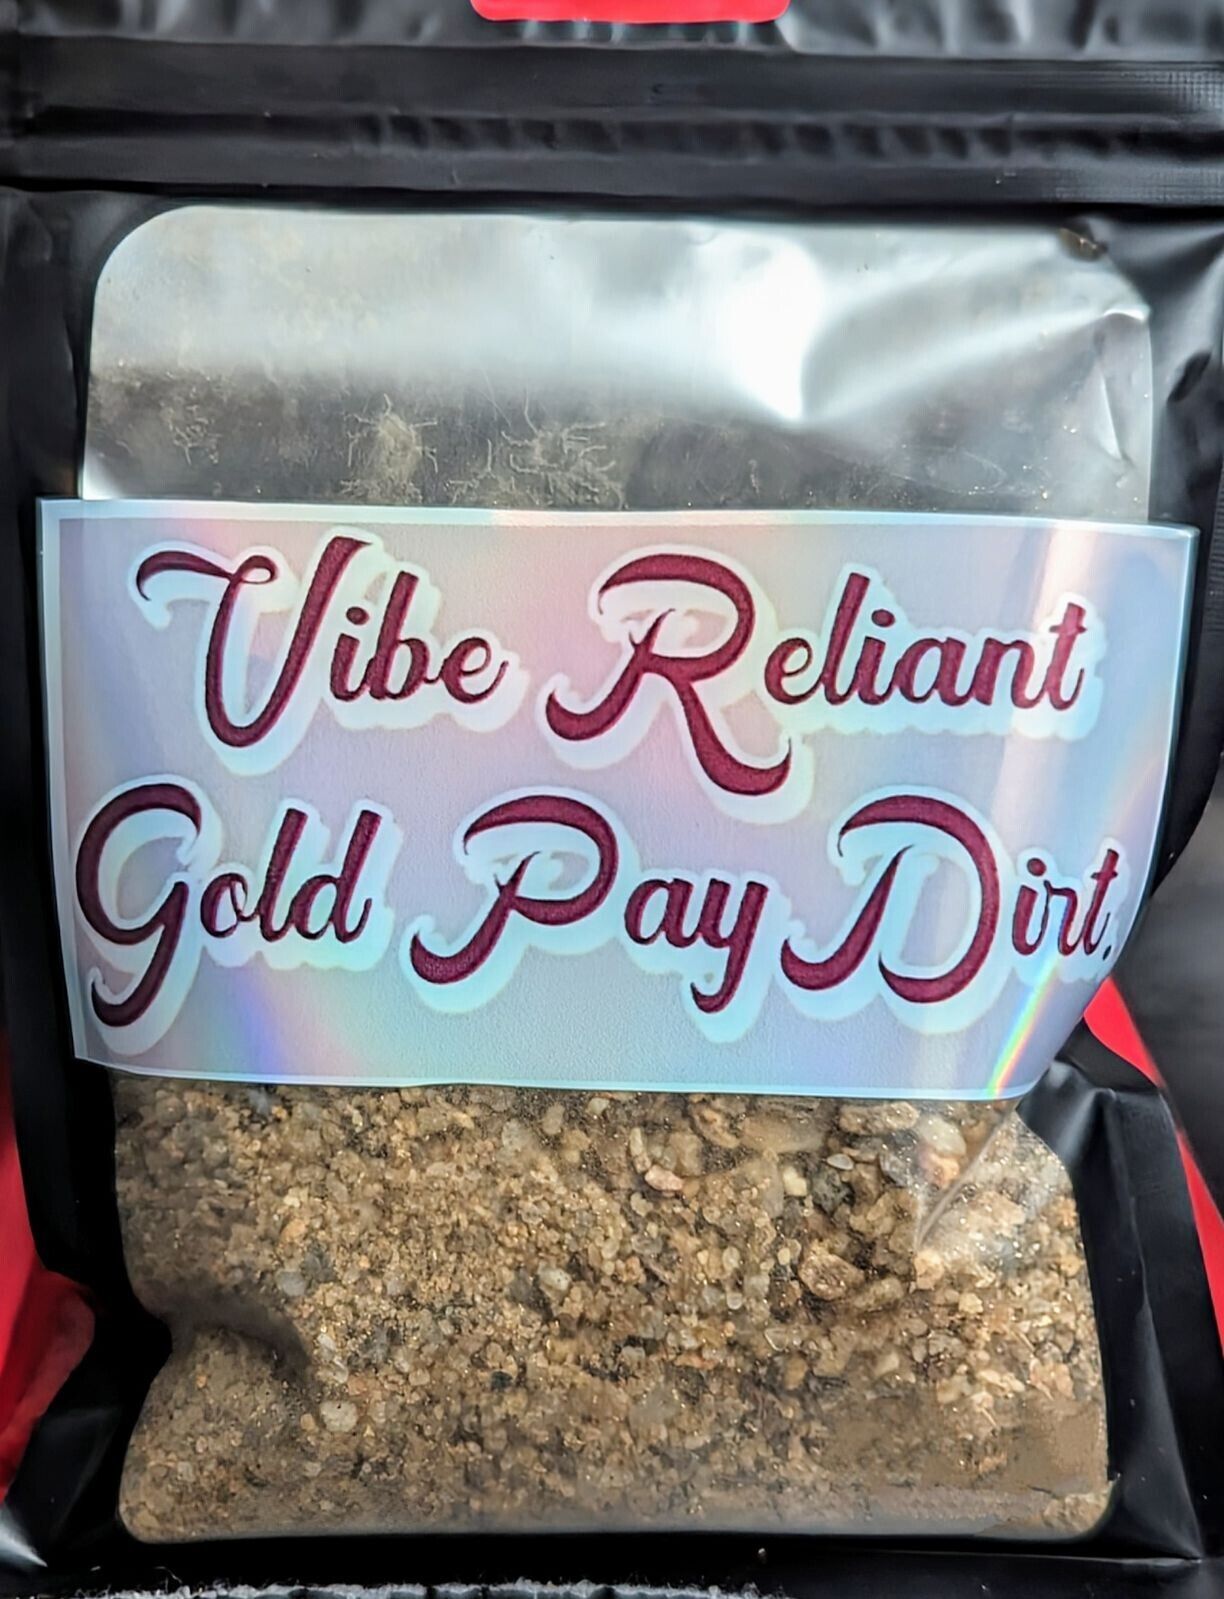  3 oz Unsearched Gold Rich  Pay Dirt High Quality. Most Of All Lots Of Fun